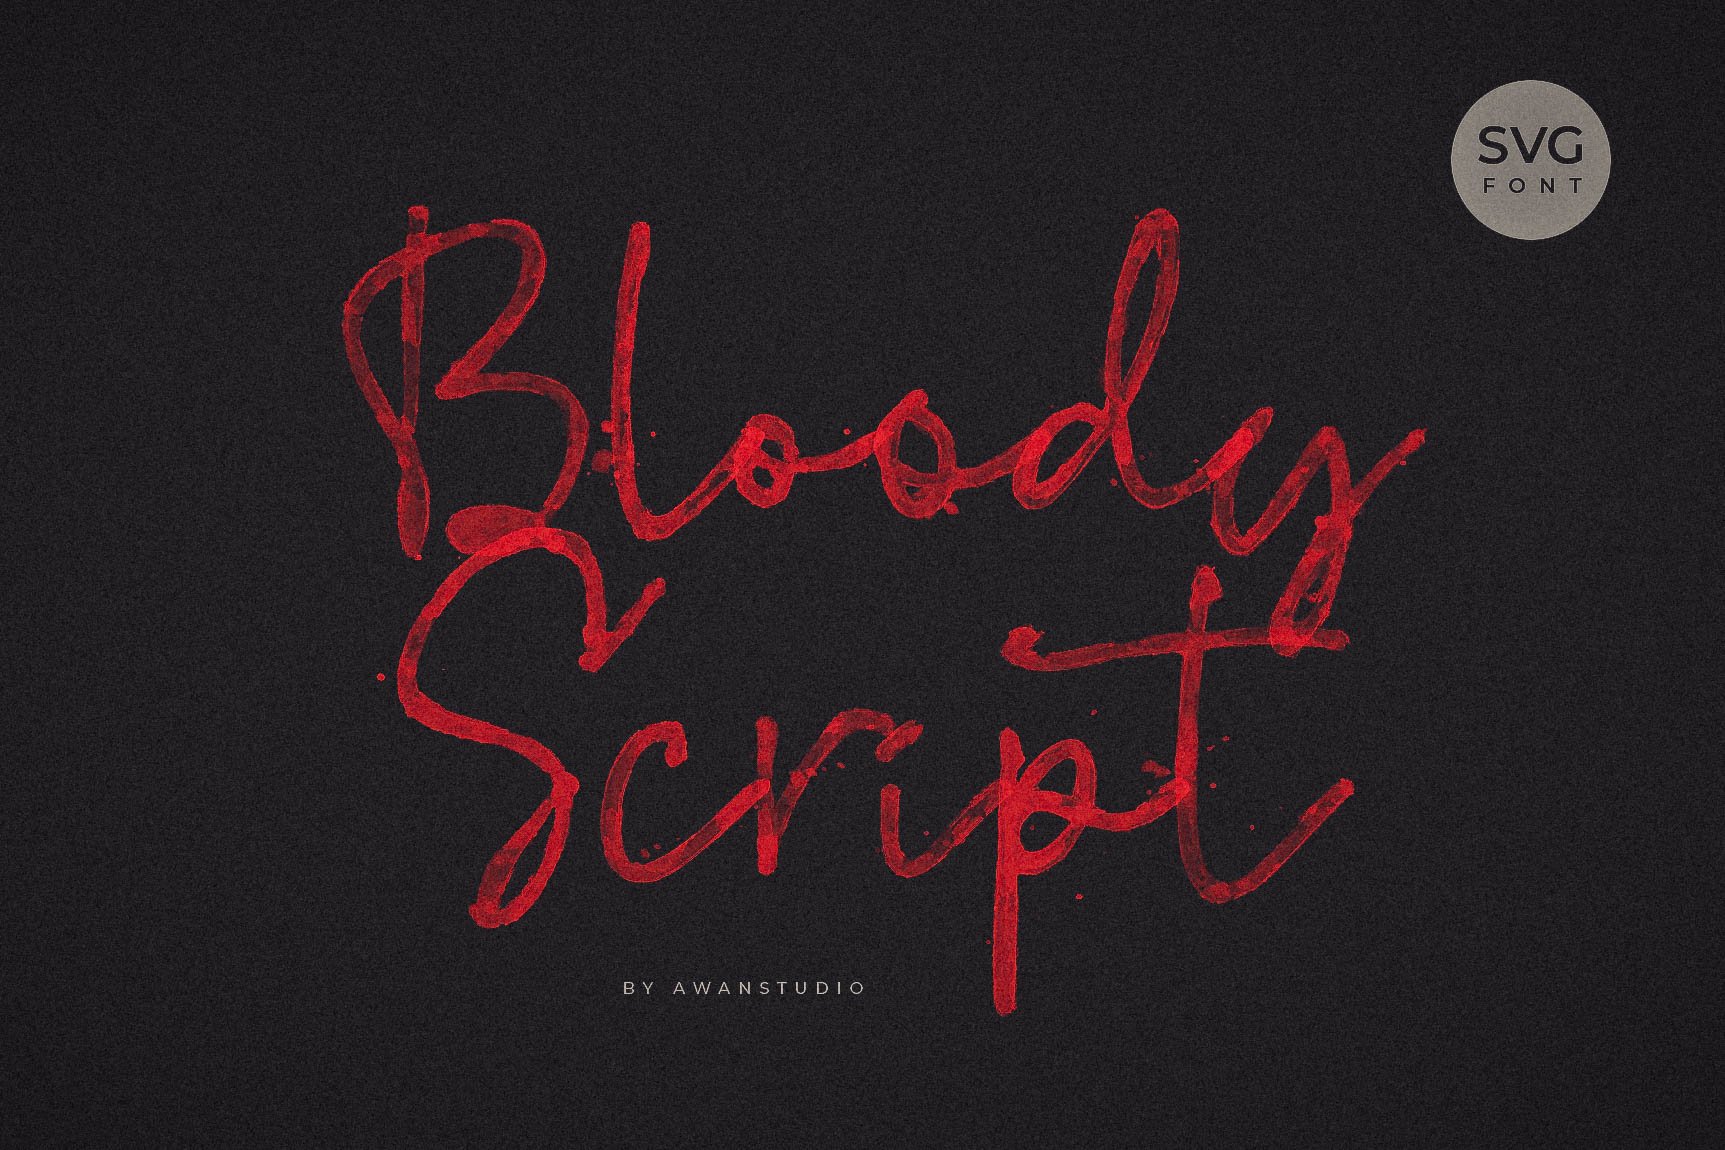 Bloody Script SVG Font cover image.